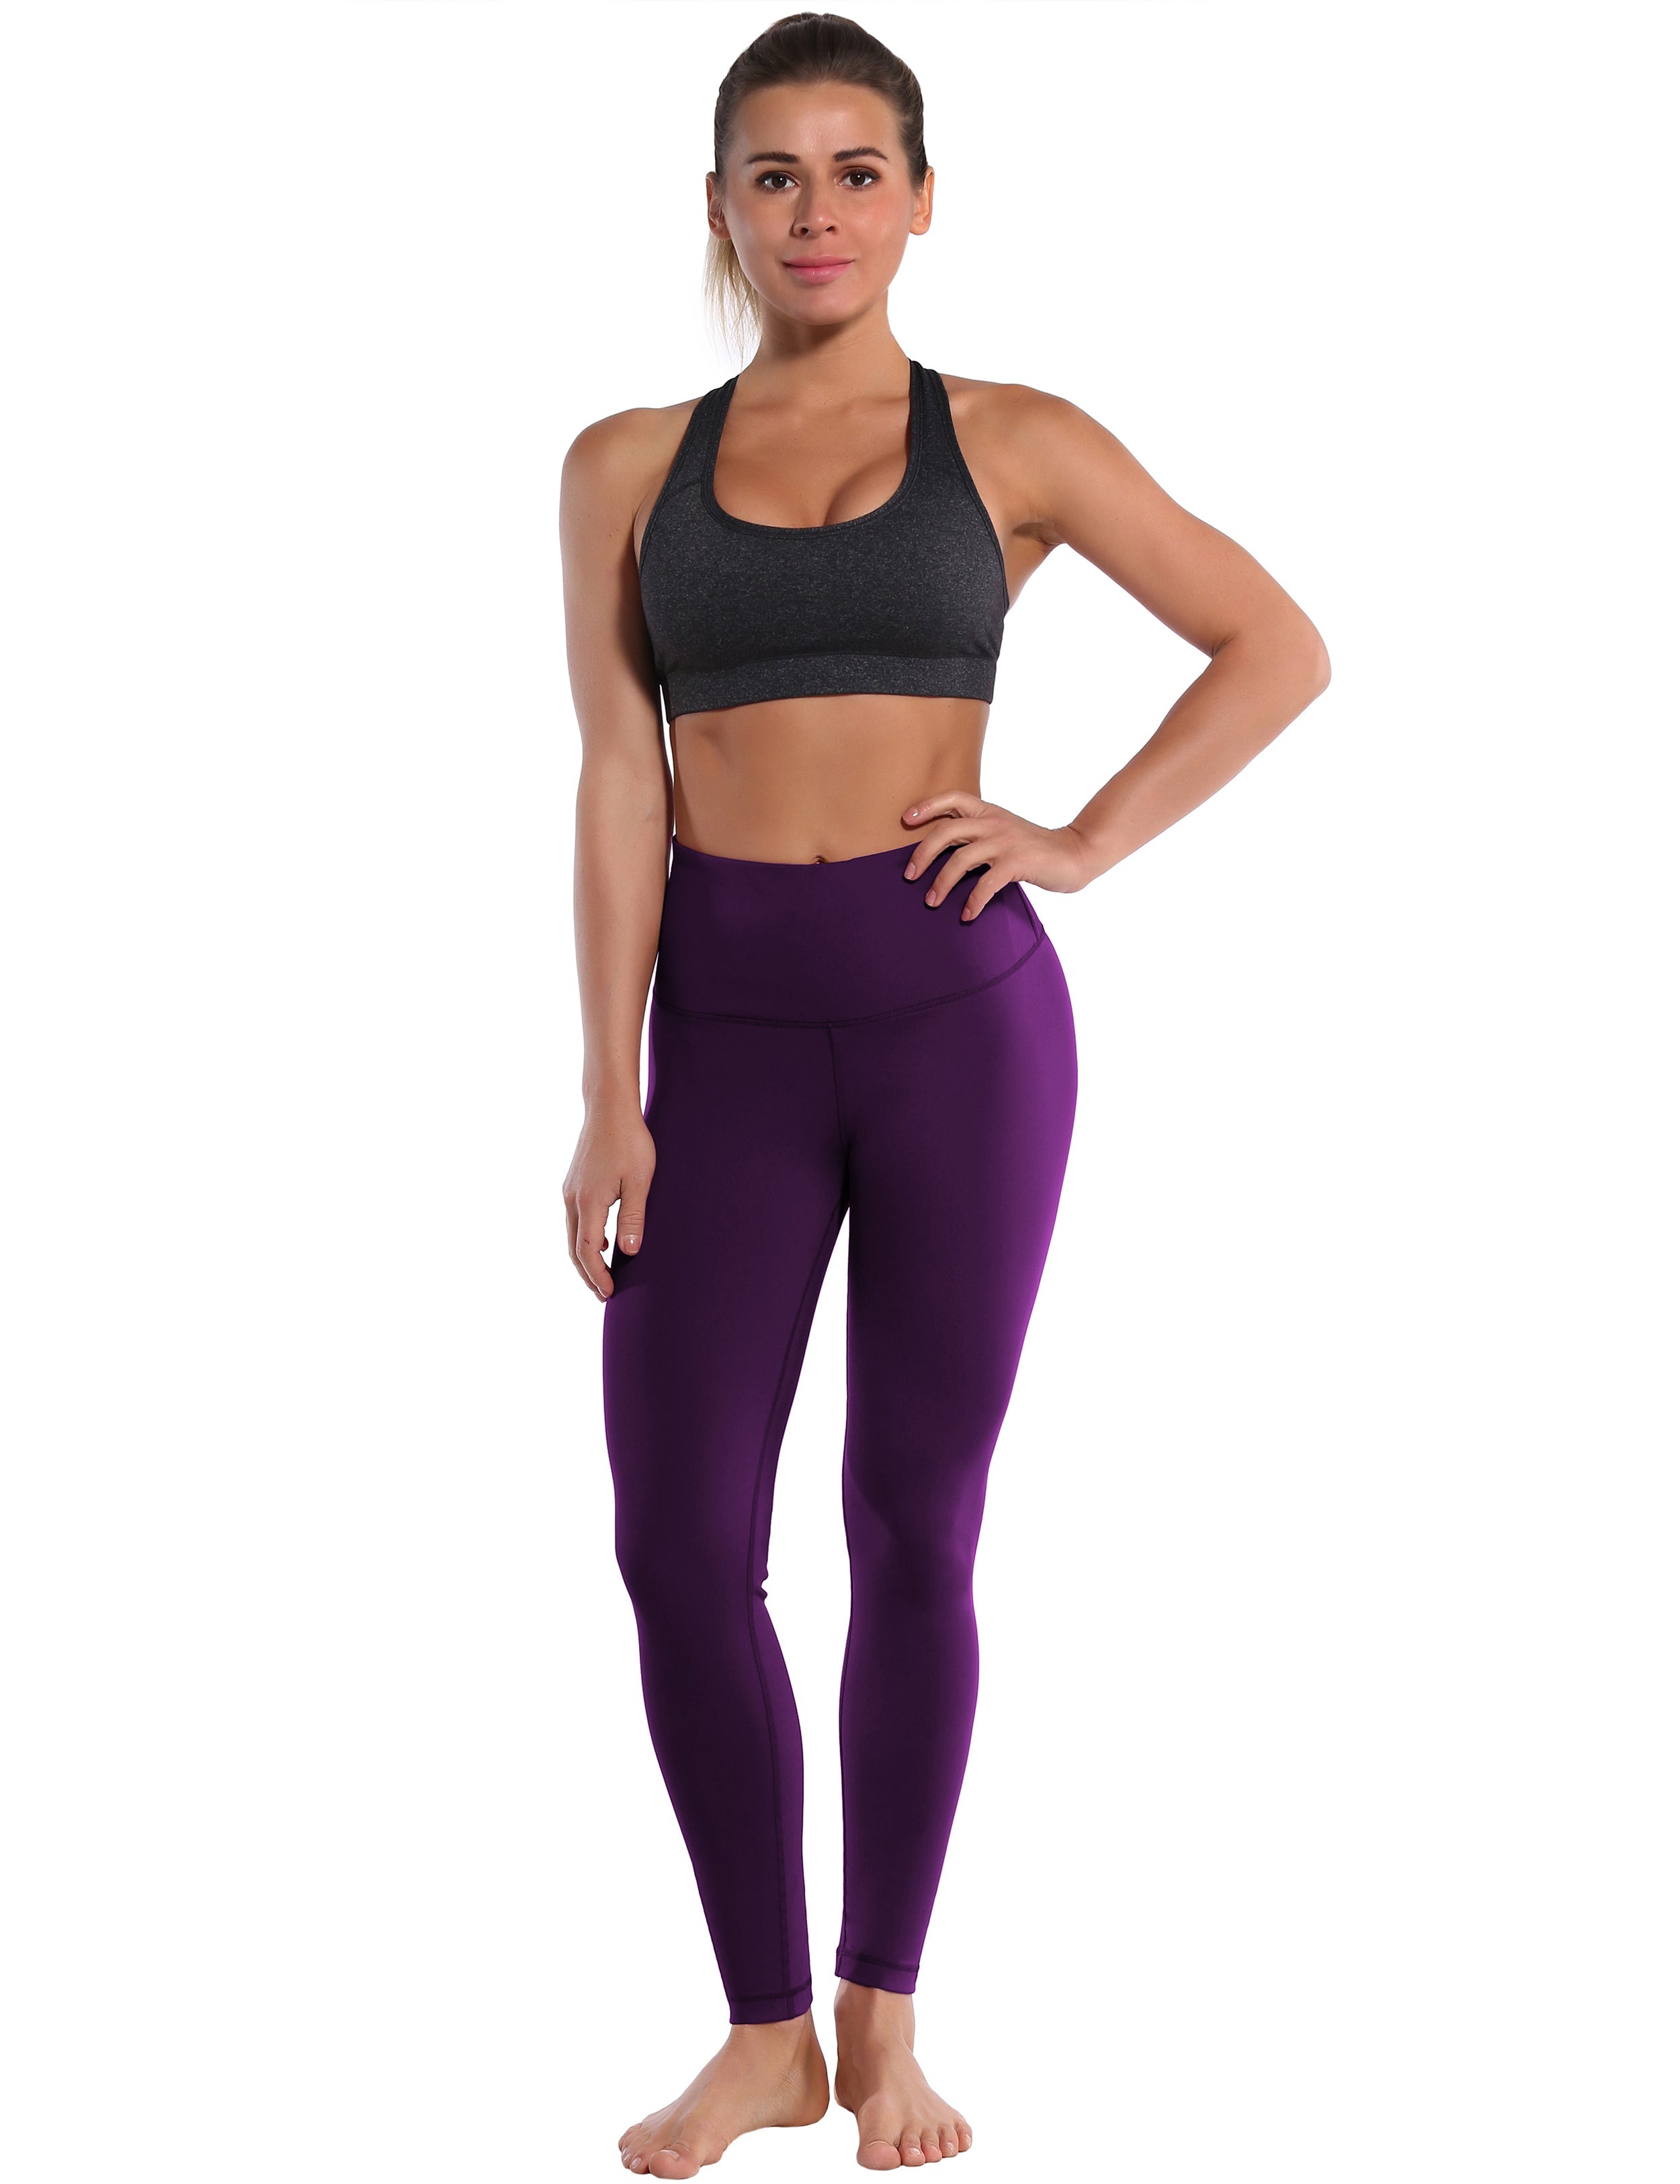 High Waist yogastudio Pants plum 75%Nylon/25%Spandex Fabric doesn't attract lint easily 4-way stretch No see-through Moisture-wicking Tummy control Inner pocket Four lengths